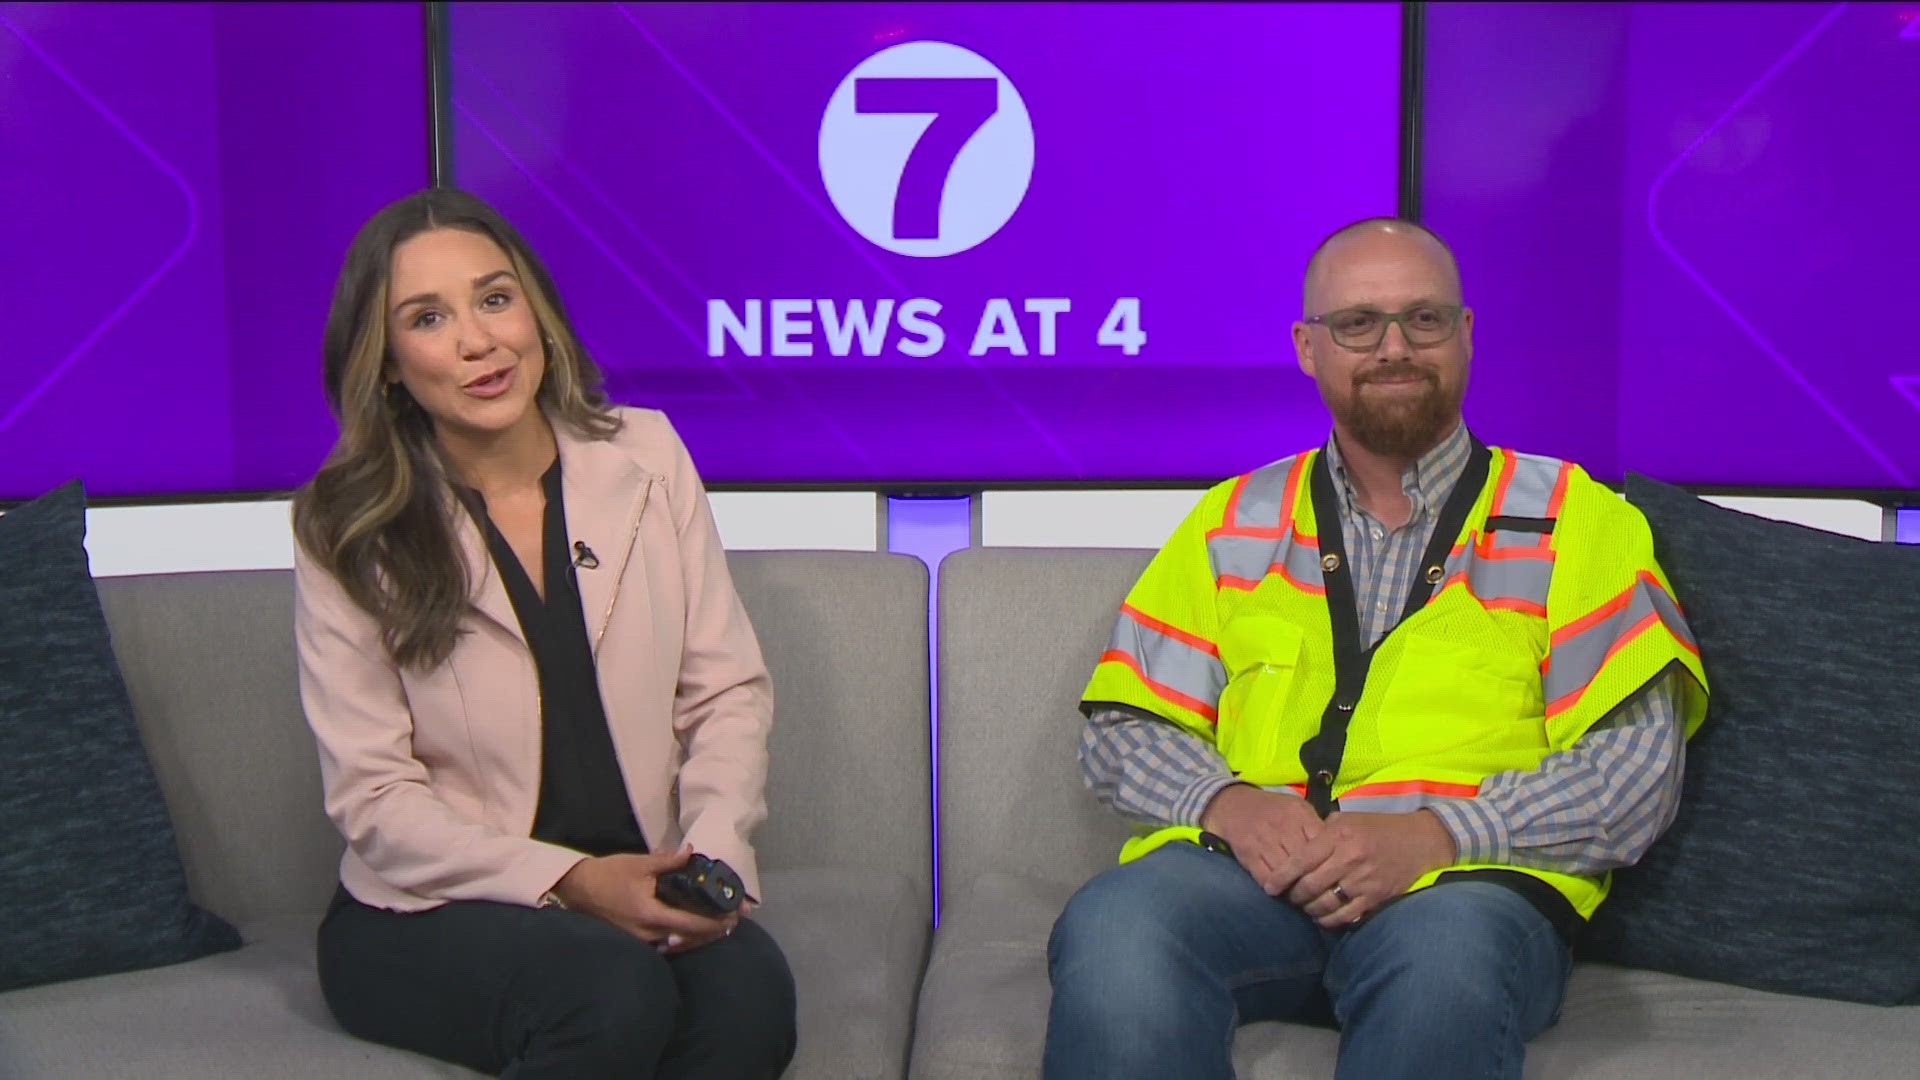 JD Lewelling with the Idaho Transportation Department shared with KTVB how drivers can stay safe on the road.